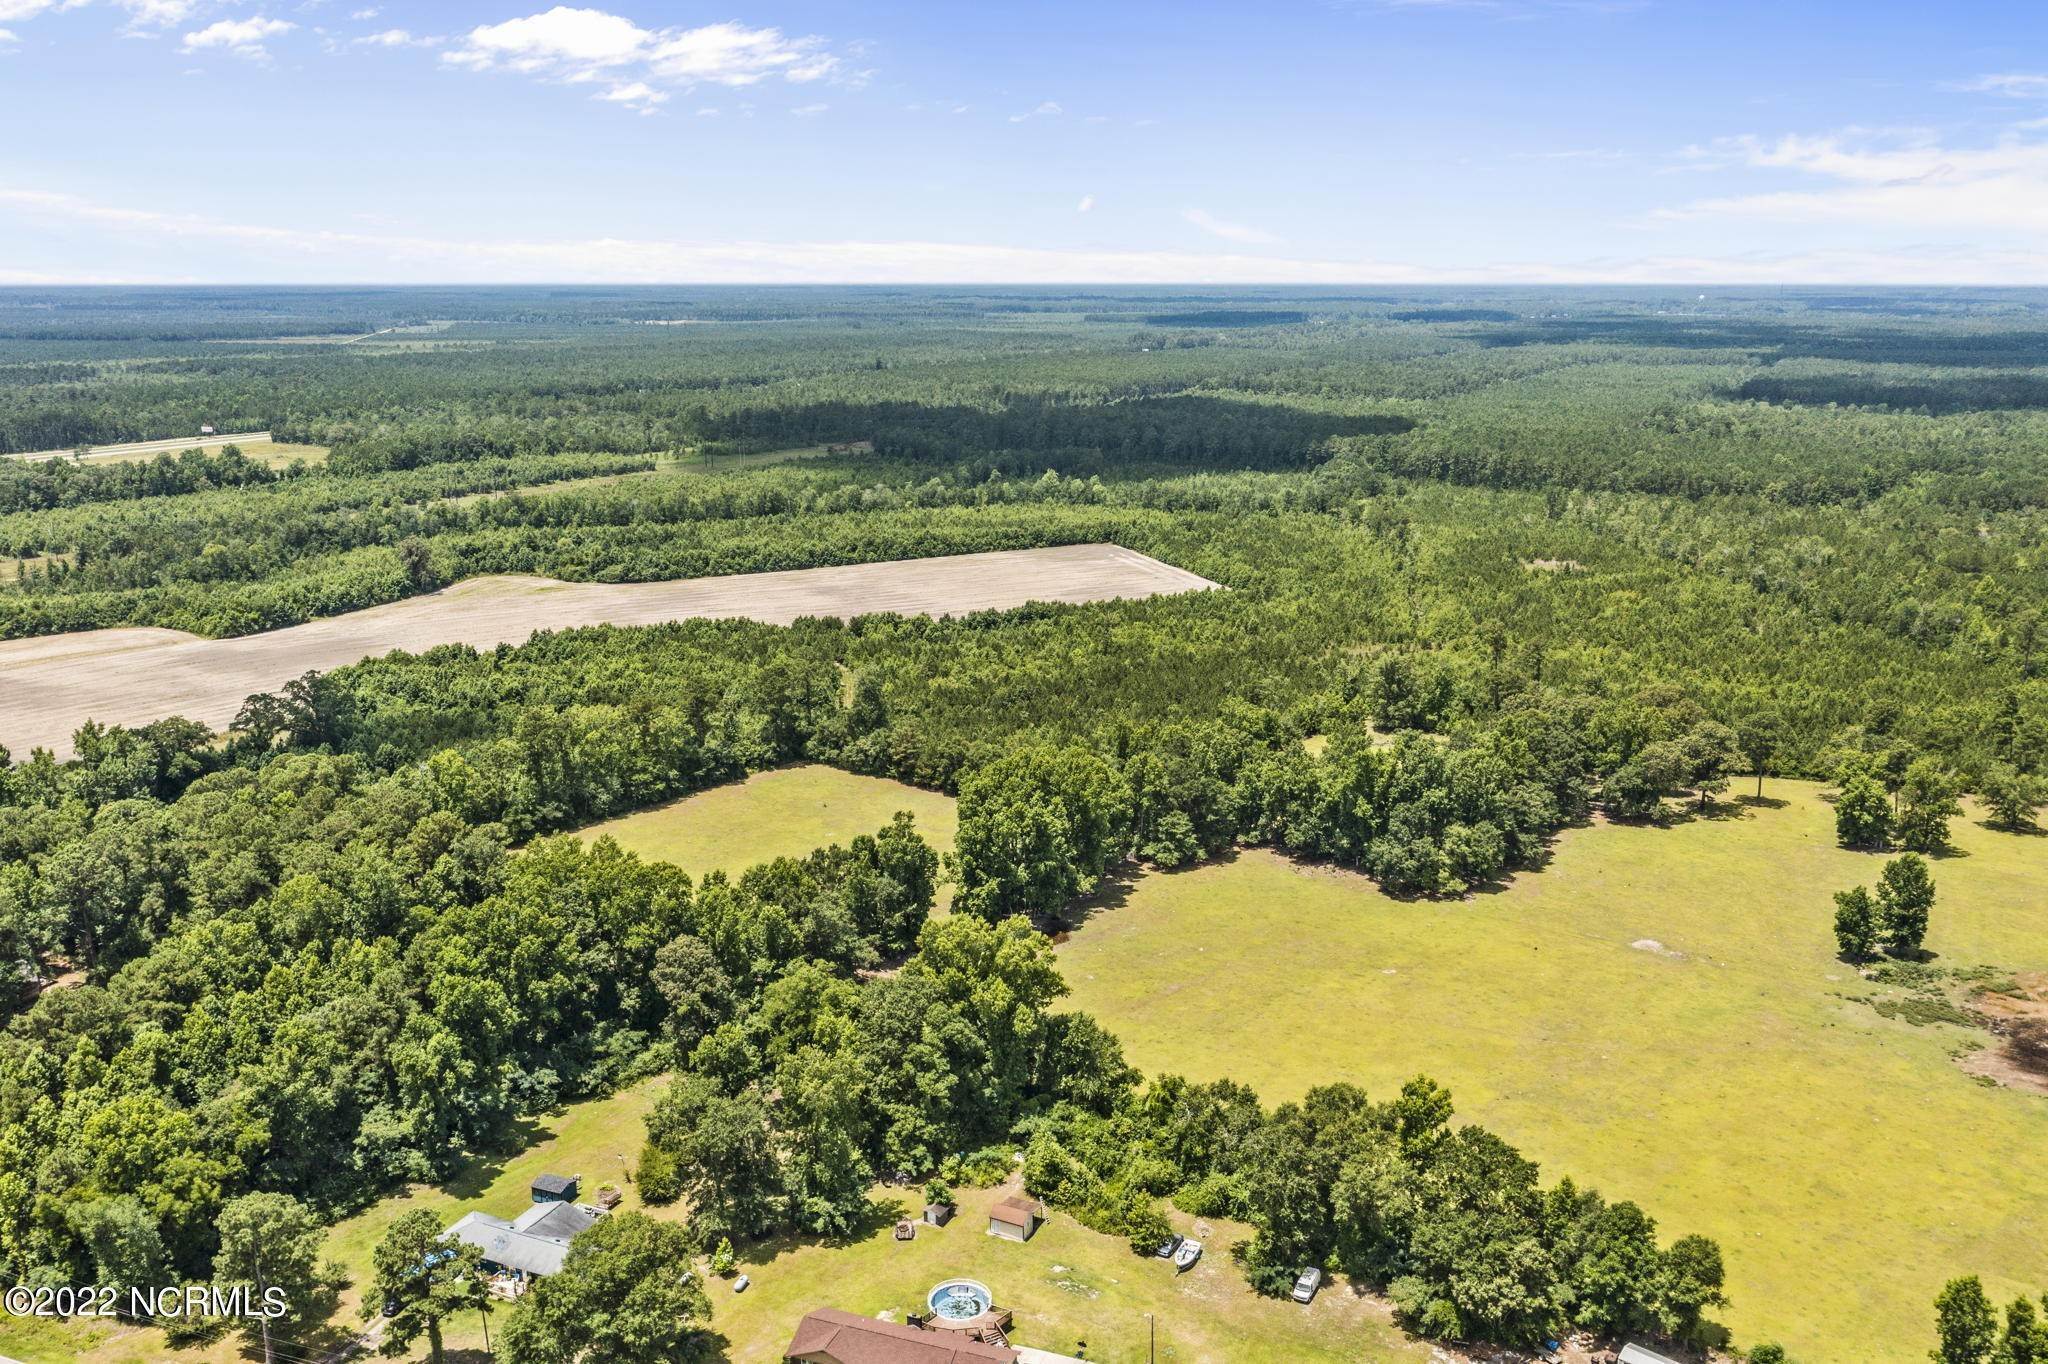 9. Land for Sale at Tr-1 Saw Mill Road Leland, North Carolina 28451 United States